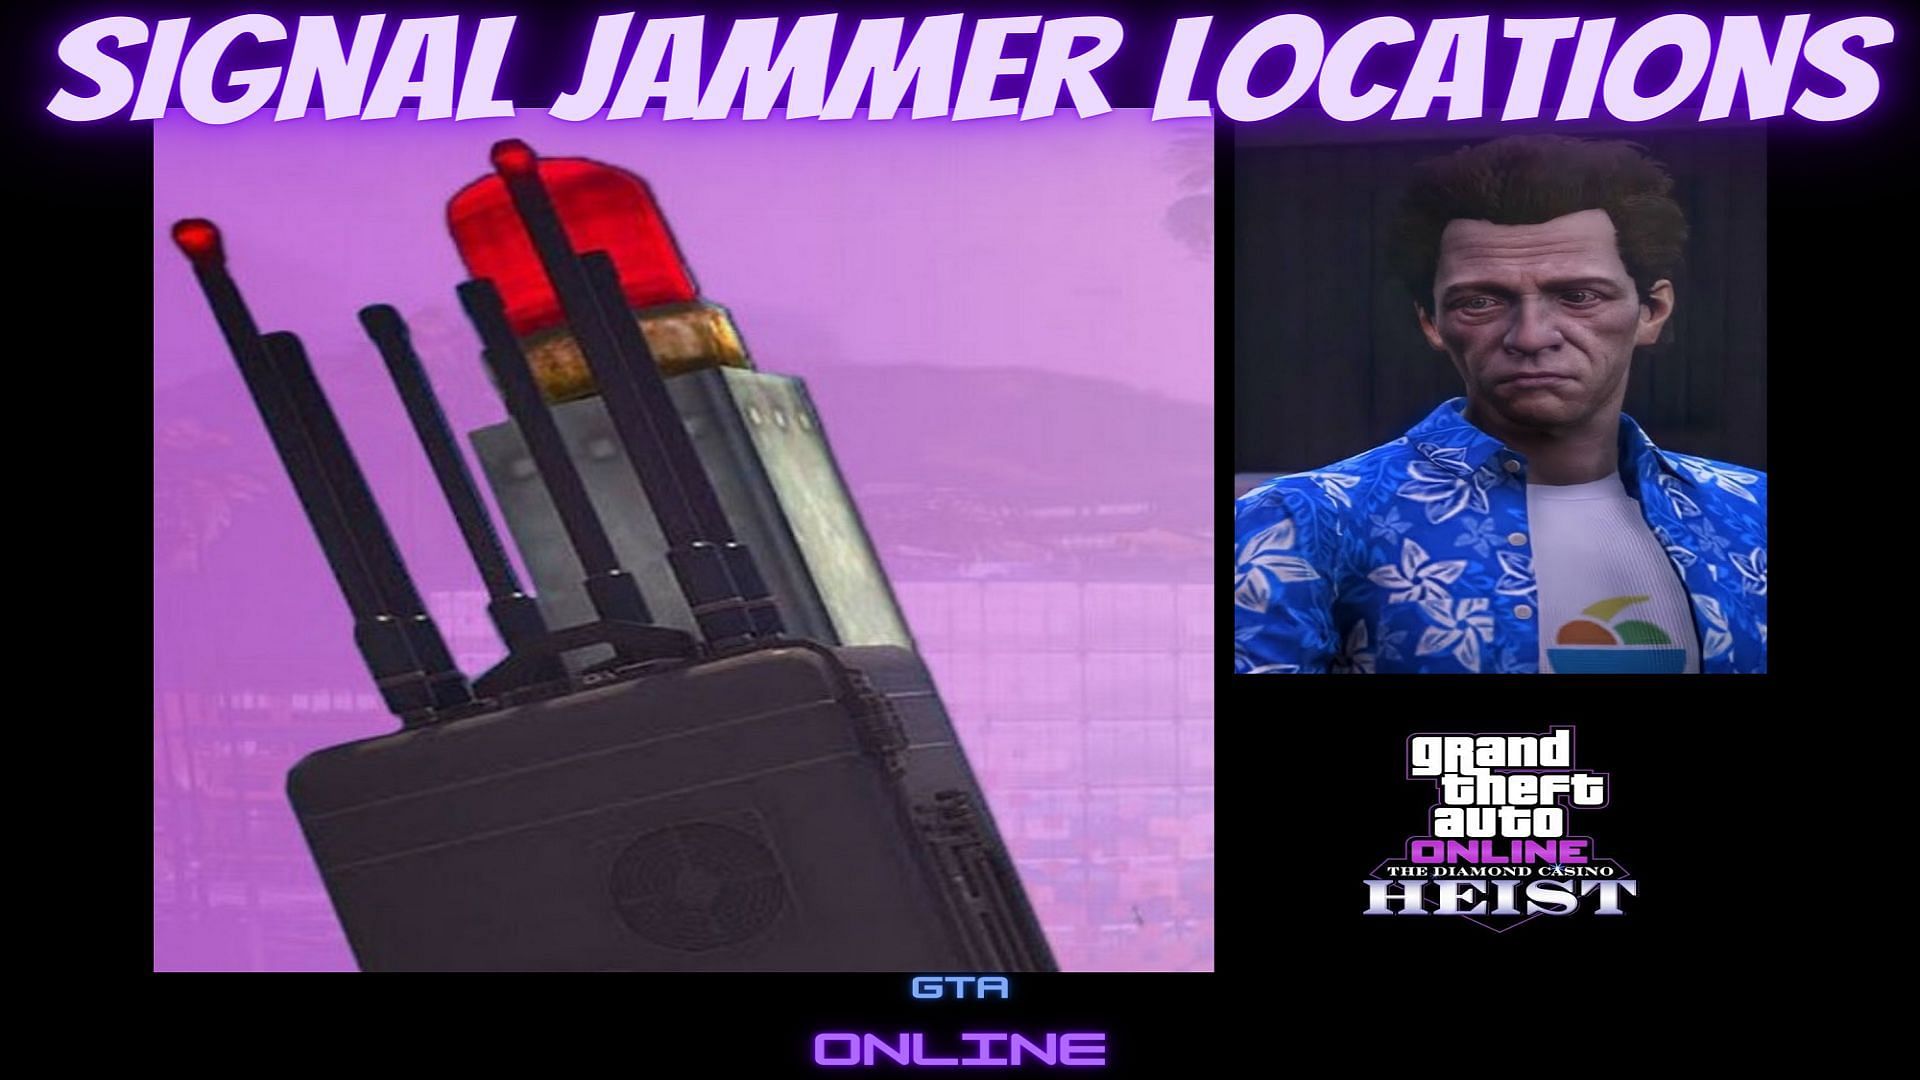 GTA Online All signal jammer locations